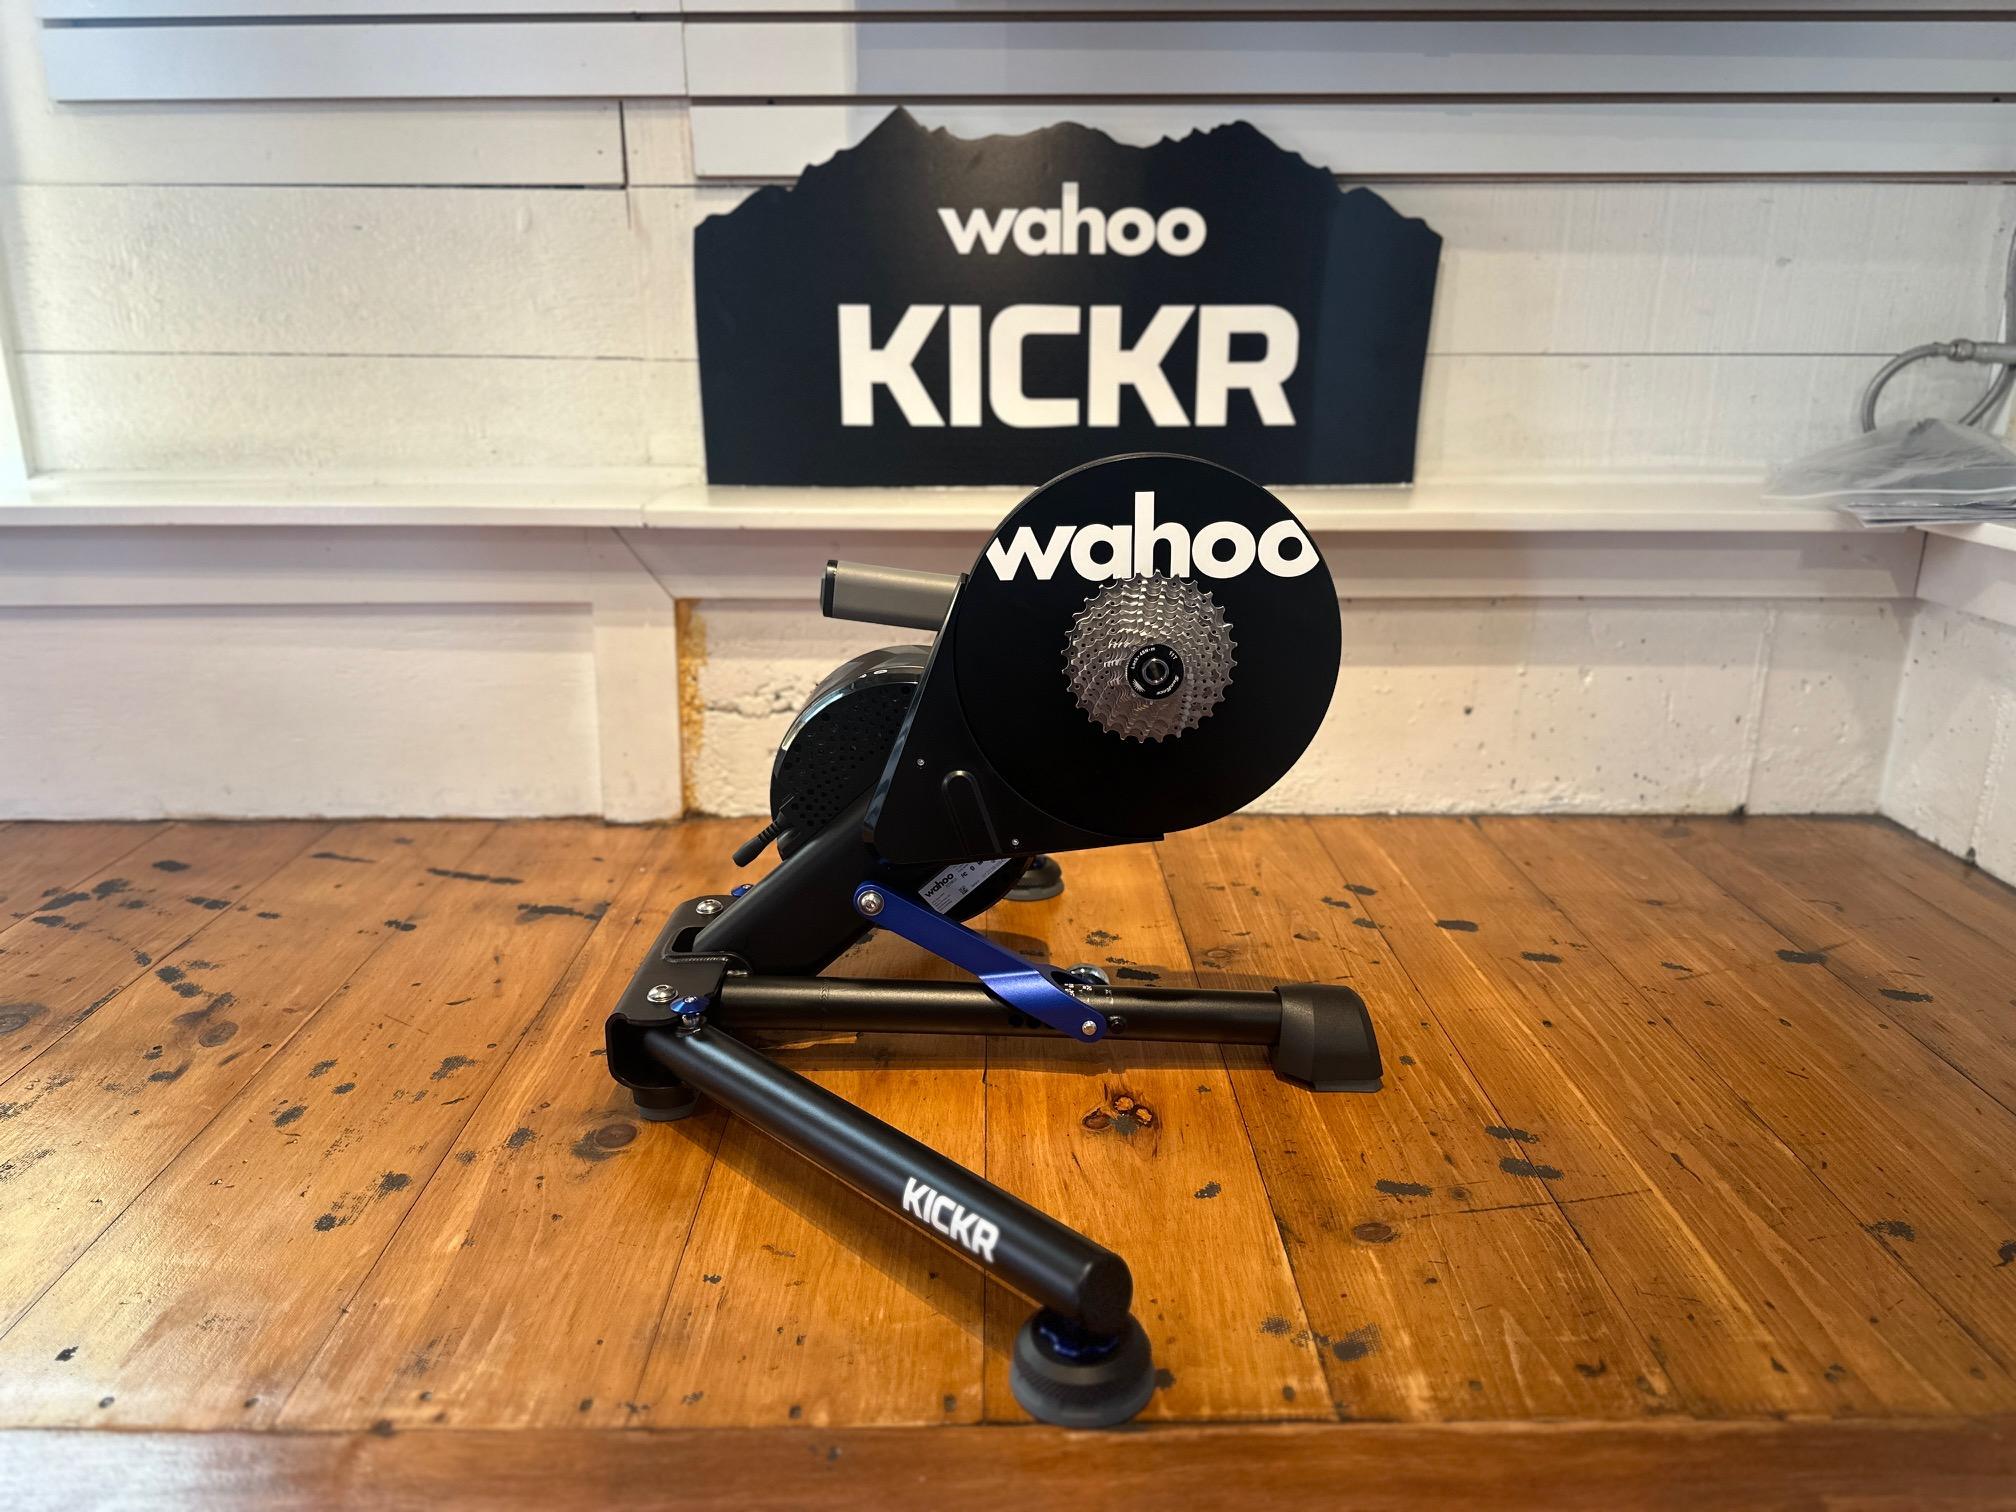 Which Wahoo Kick’r Model is Right for Me?